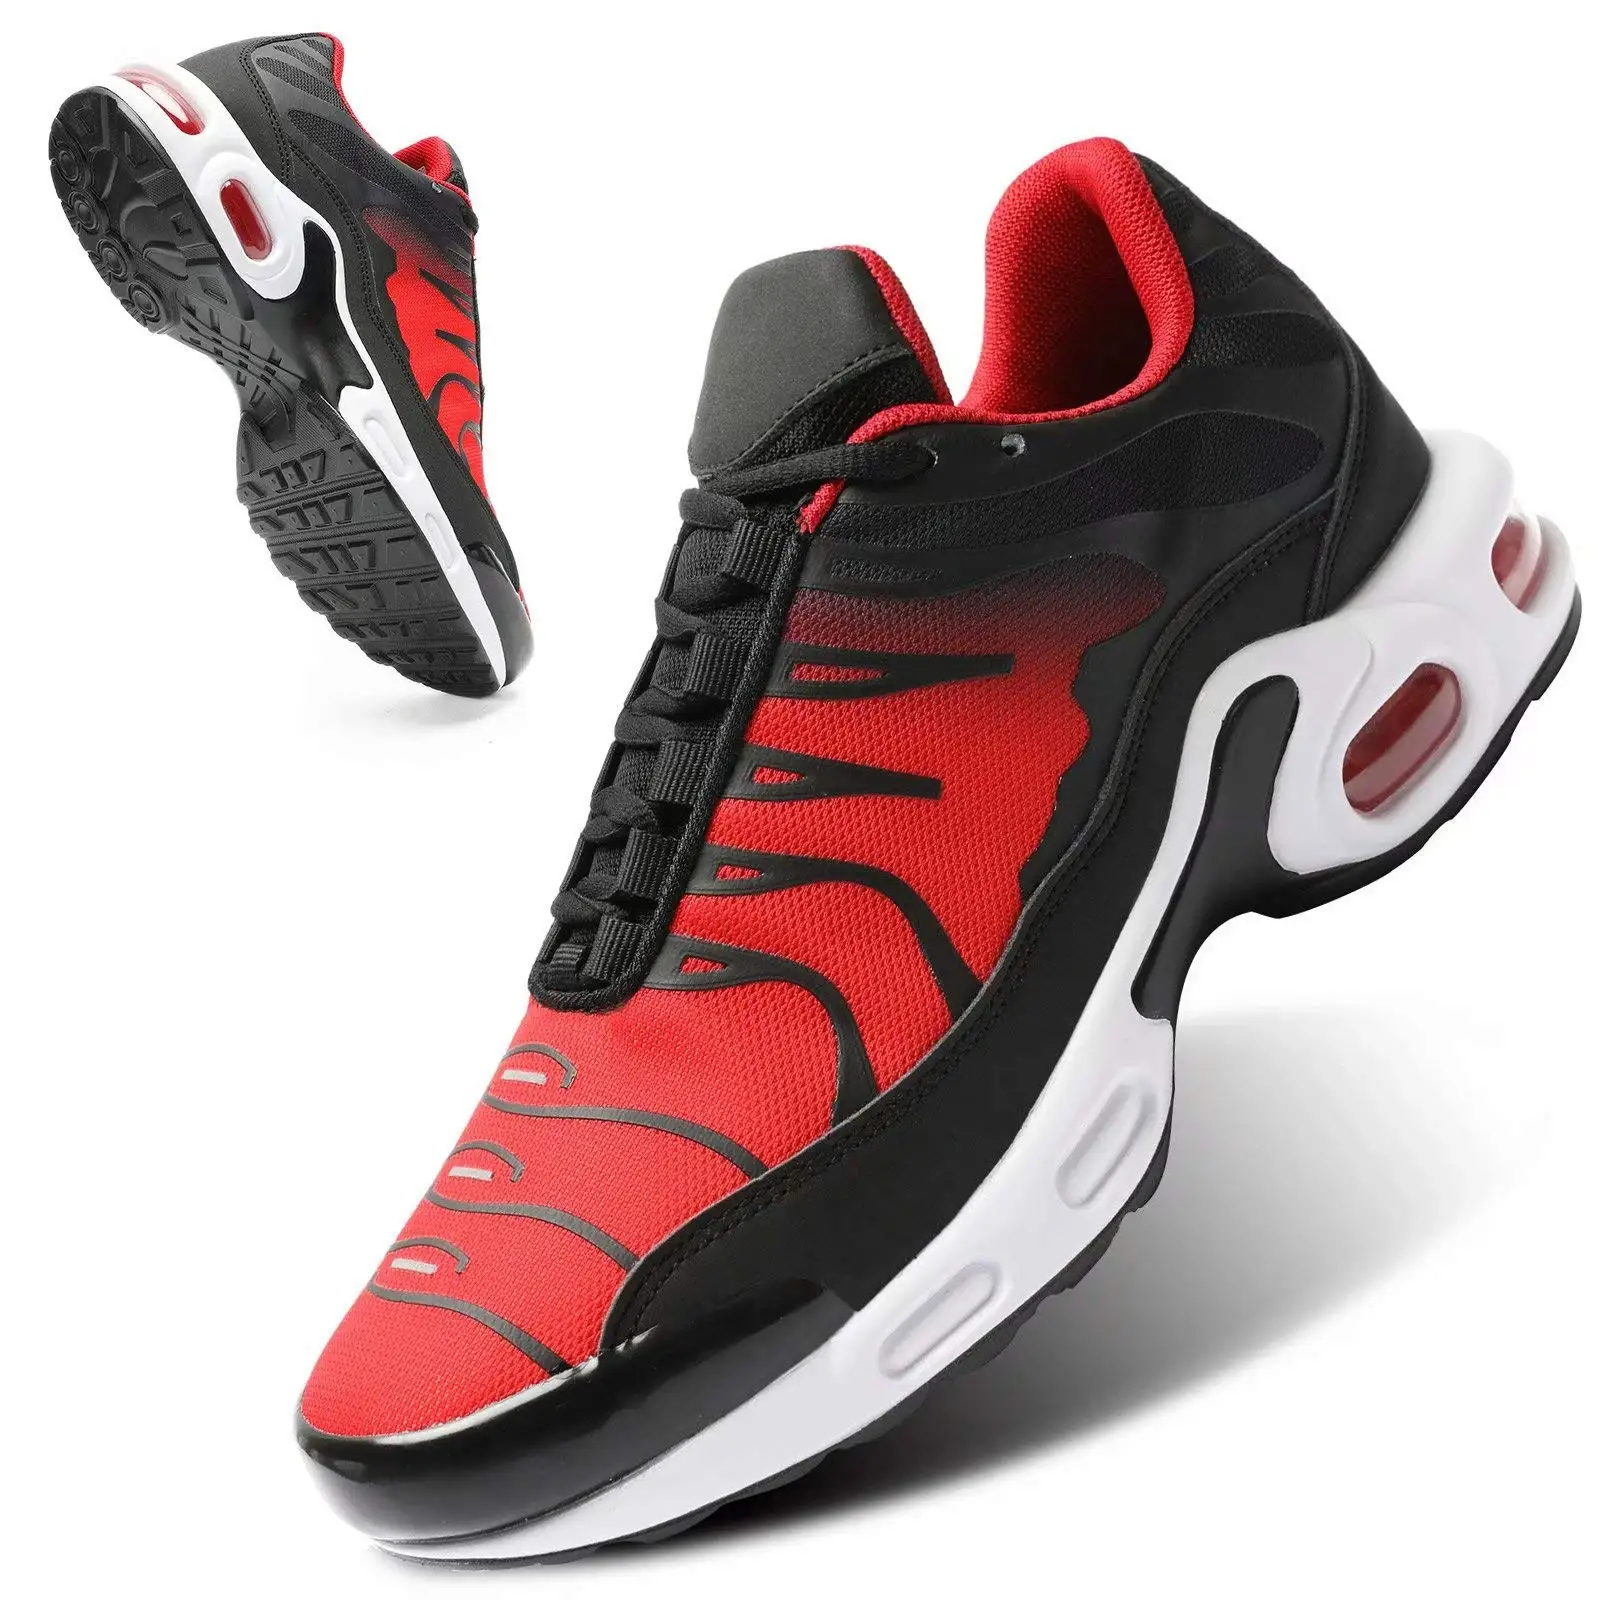 PU outsole mesh breathable lace up running shoes men"e;s air cushion sports shoes